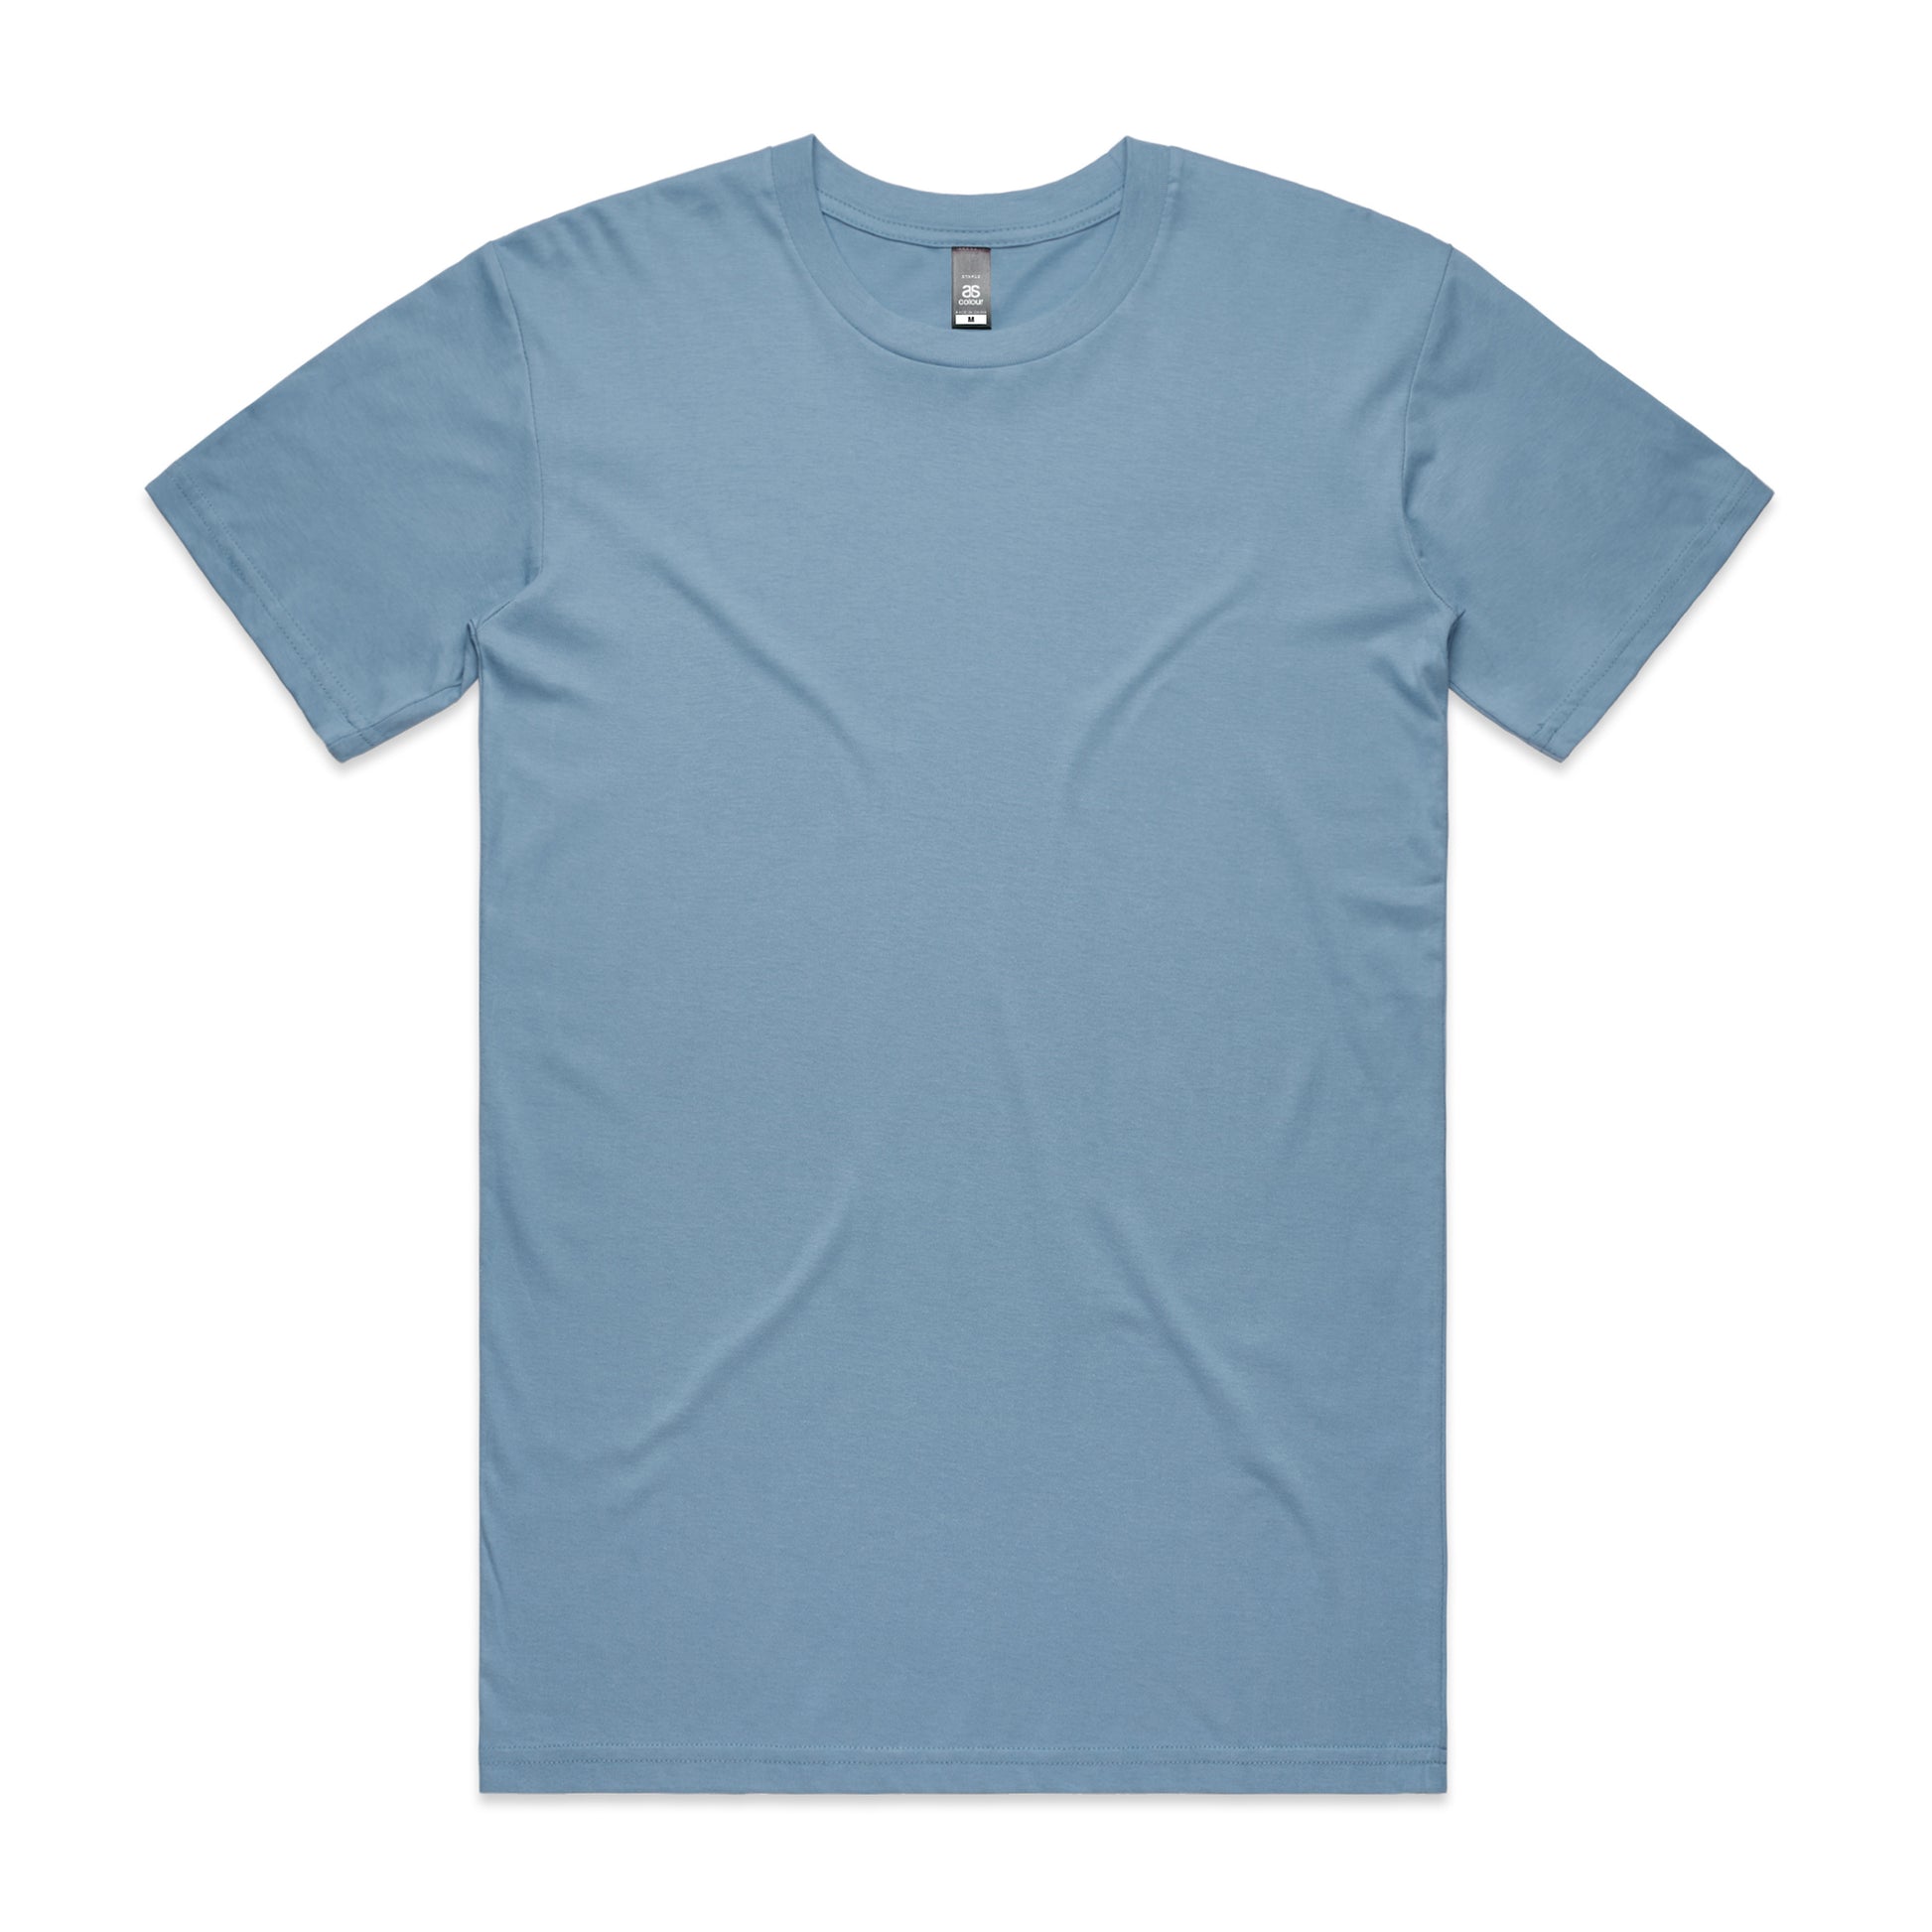 High Quality T-Shirt | Spring and Fall Colors | 5001